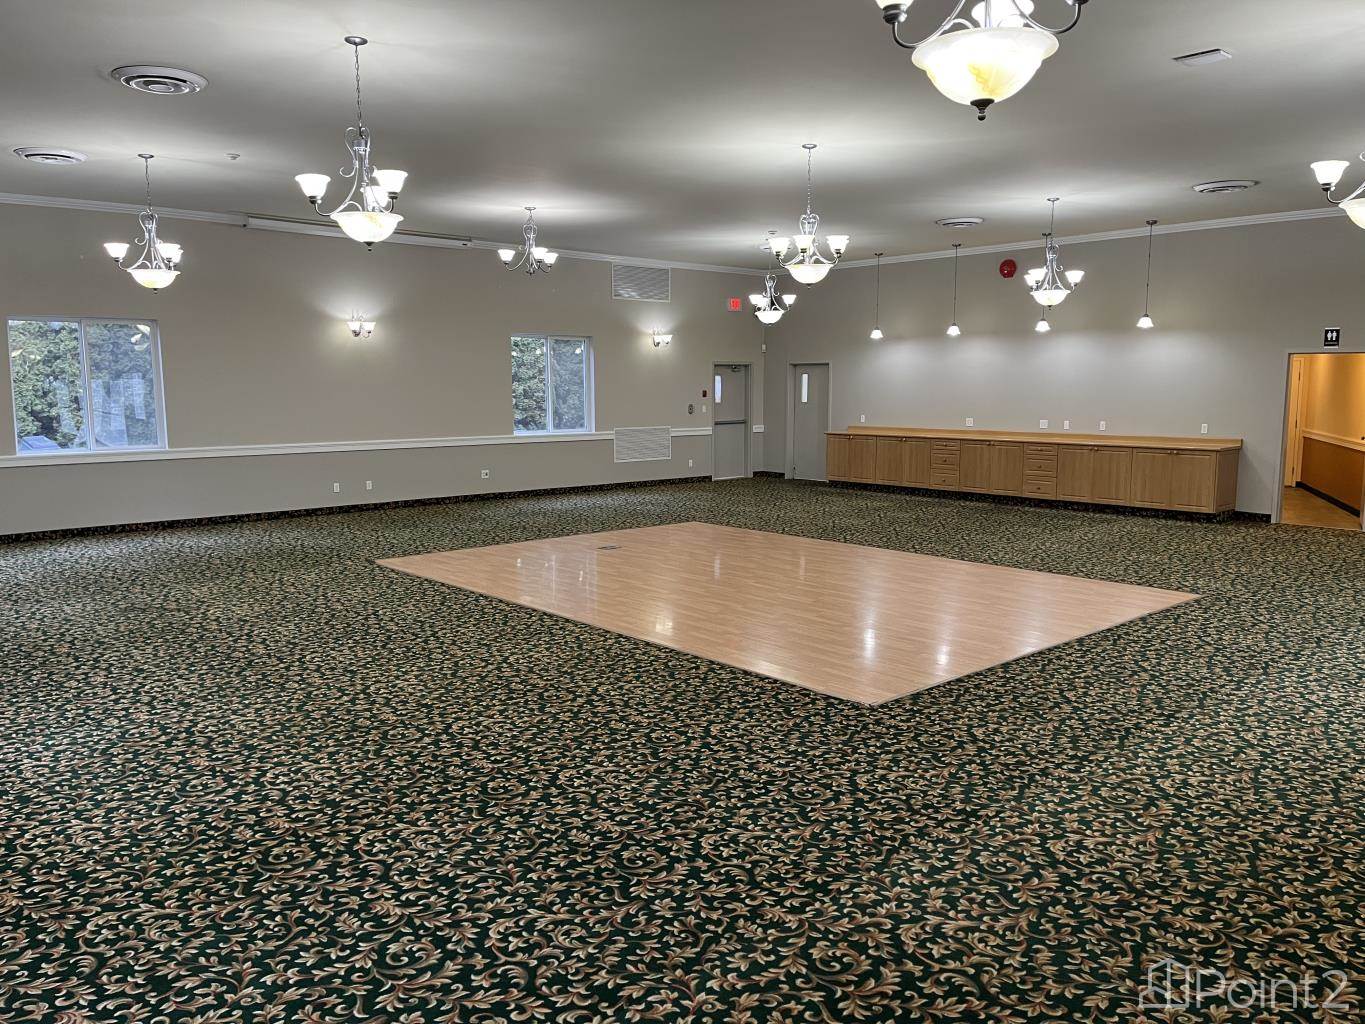 Conference Room For Lease In Days Inn Penticton, Penticton, BC null Photo 5